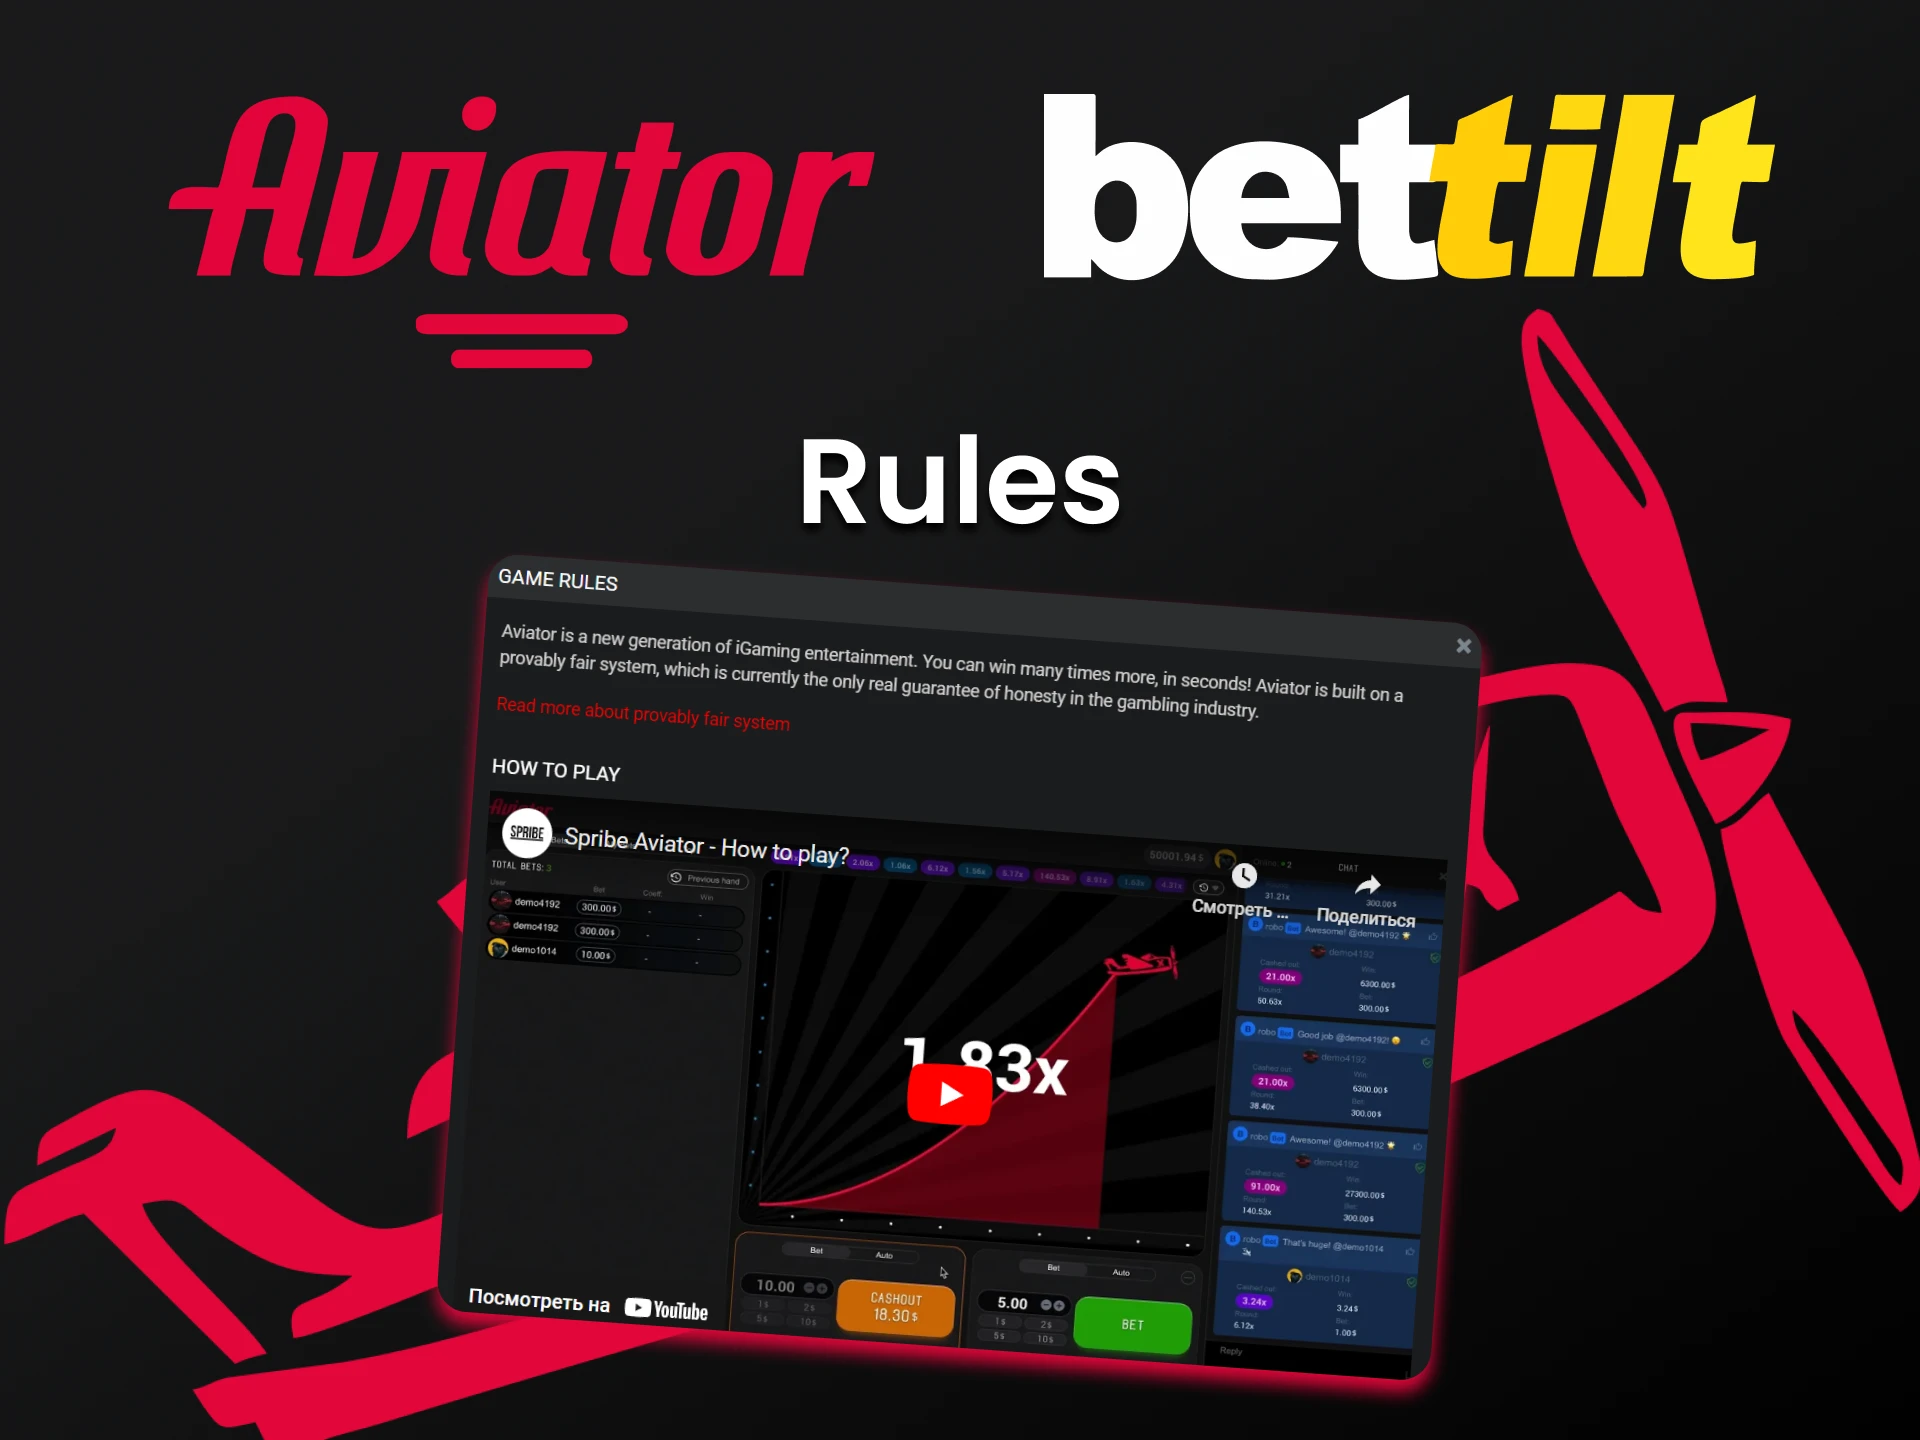 Learn the rules of the game Aviator from Bettilt.